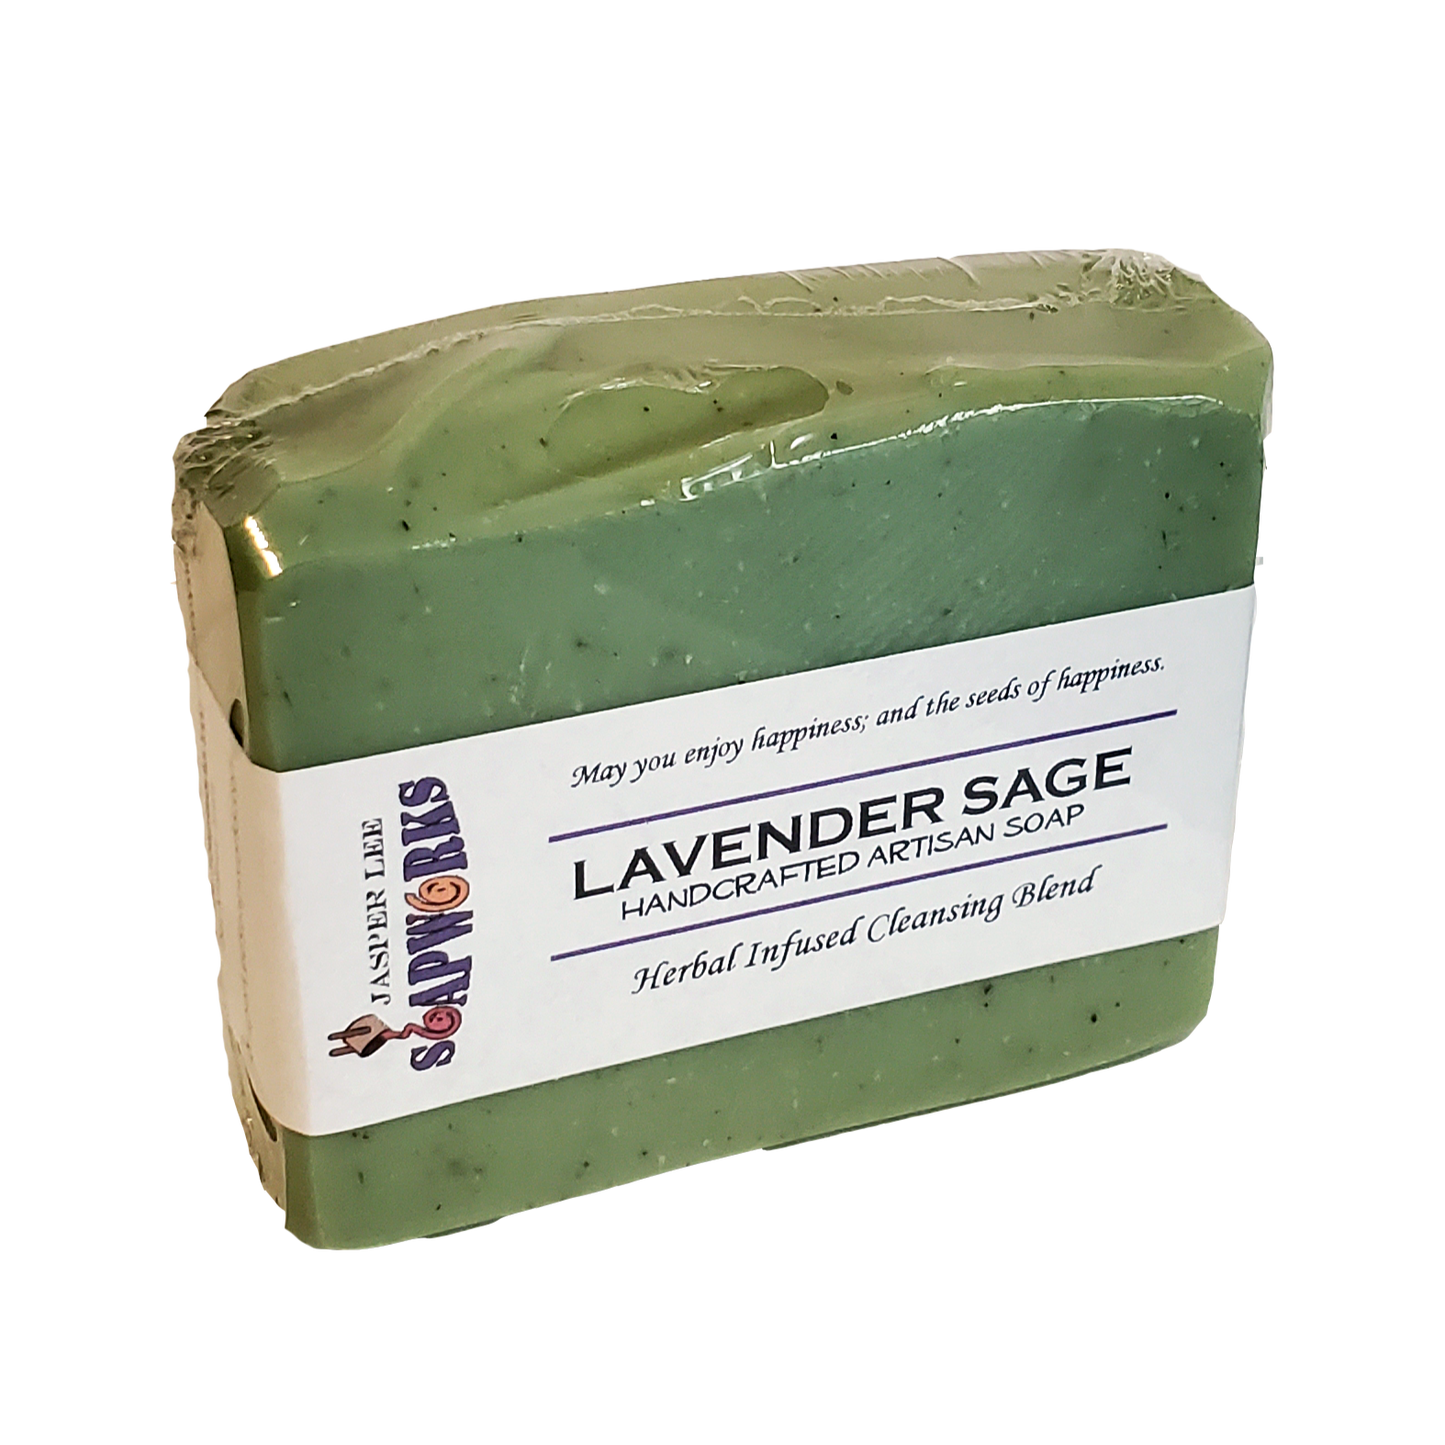 large size Lavender sage soap bar in clear biodegradable packaging